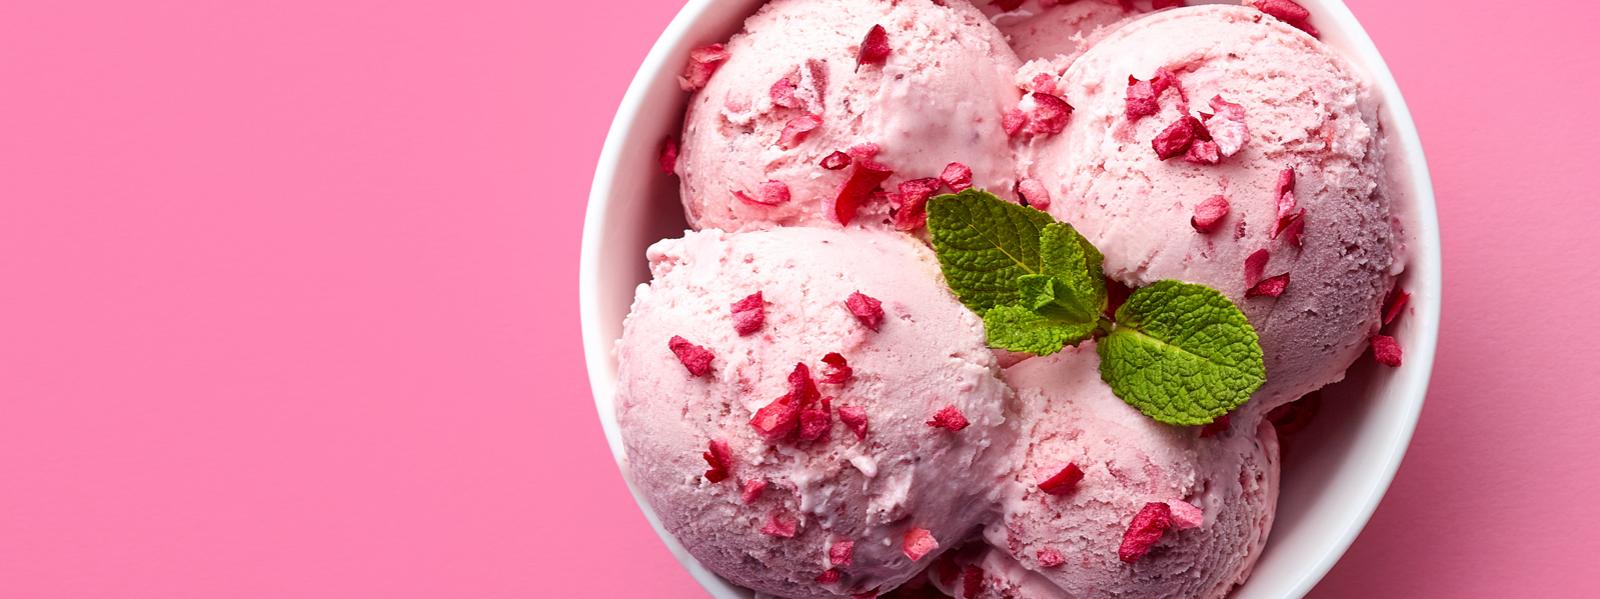 Three scoops of strawberry icecream in a white bowl on pink background